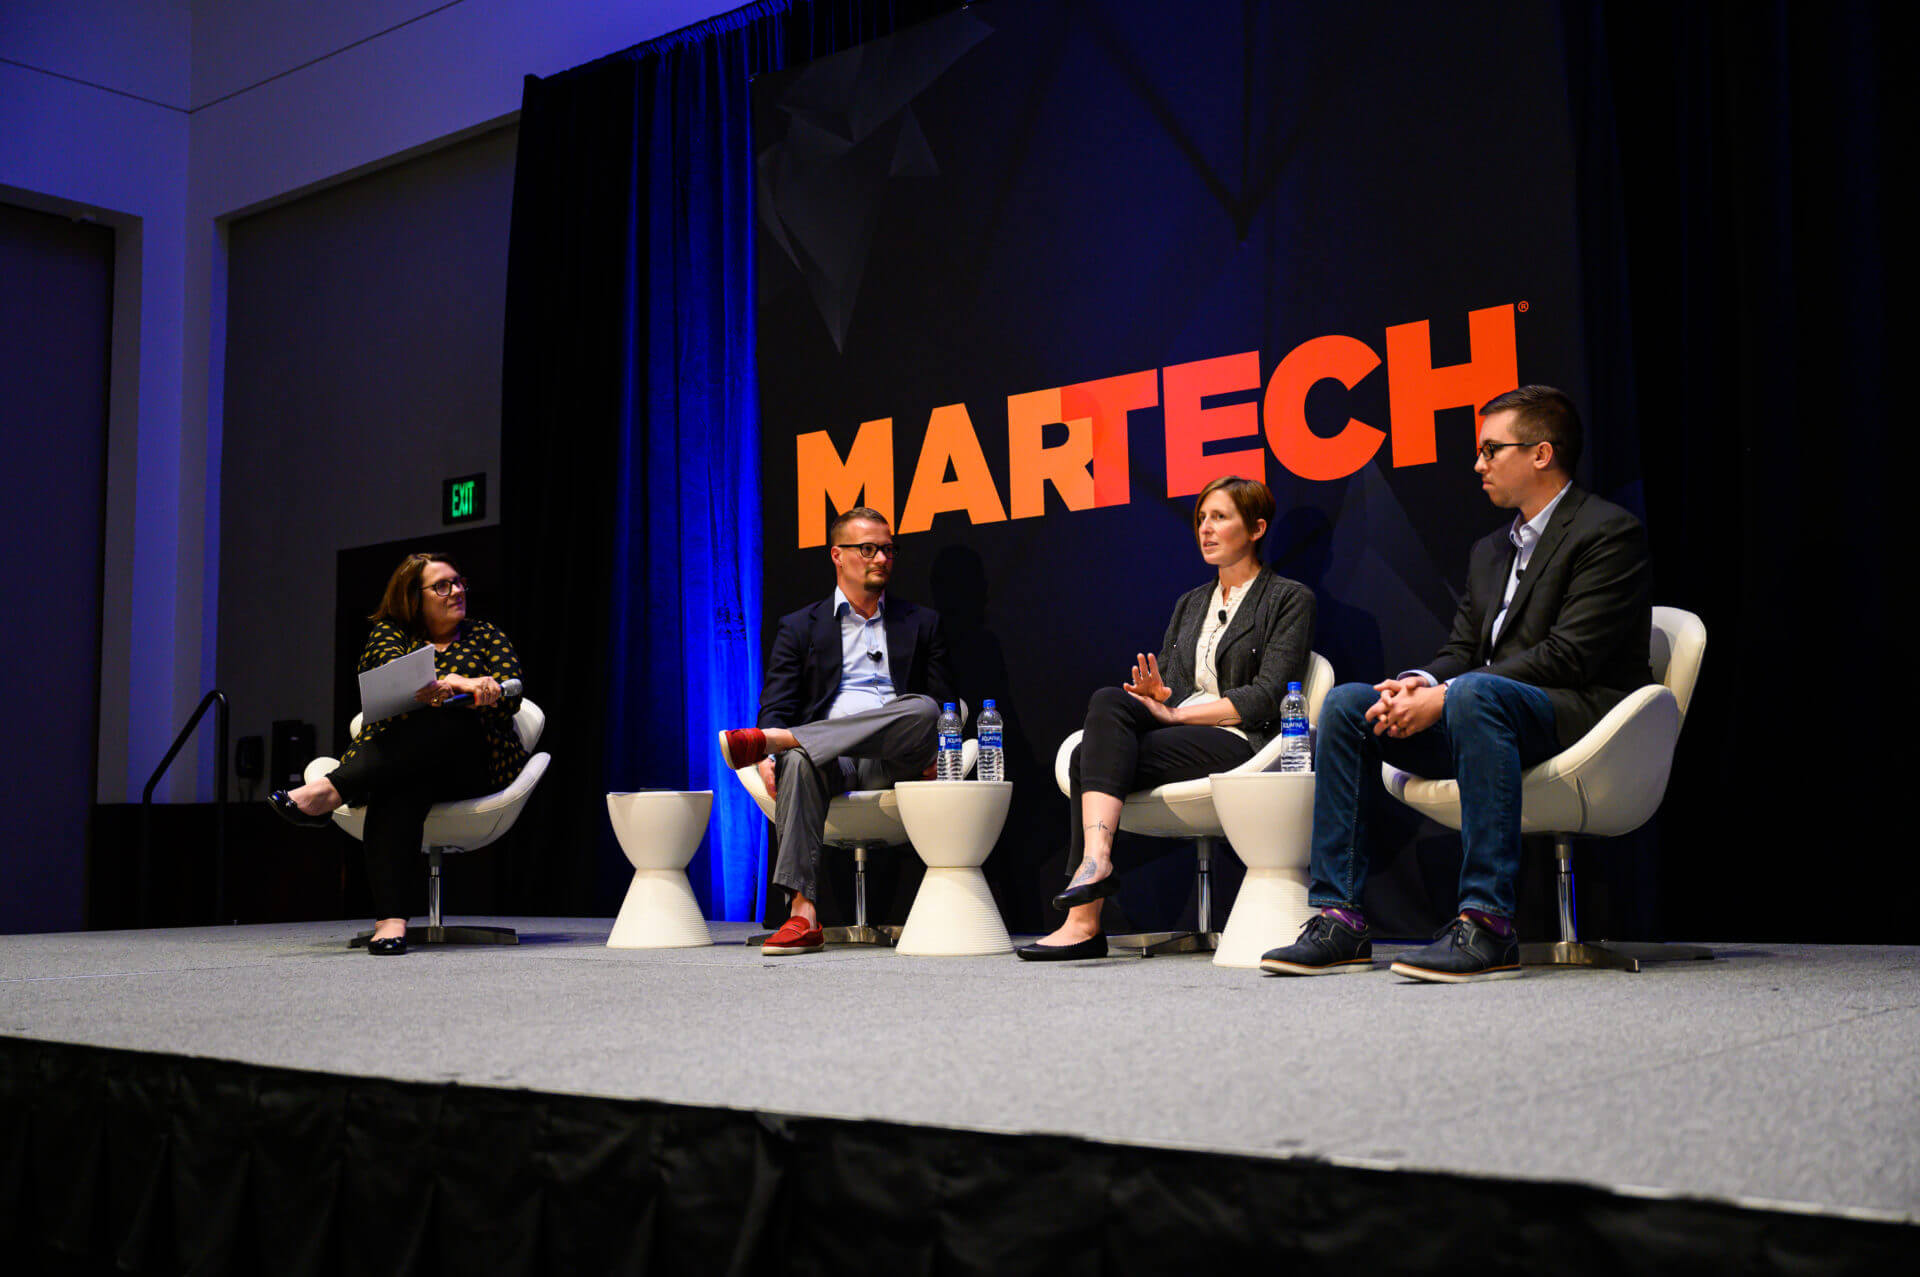 Acquiring new martech? First, get a solid evaluation, buy-in process in place